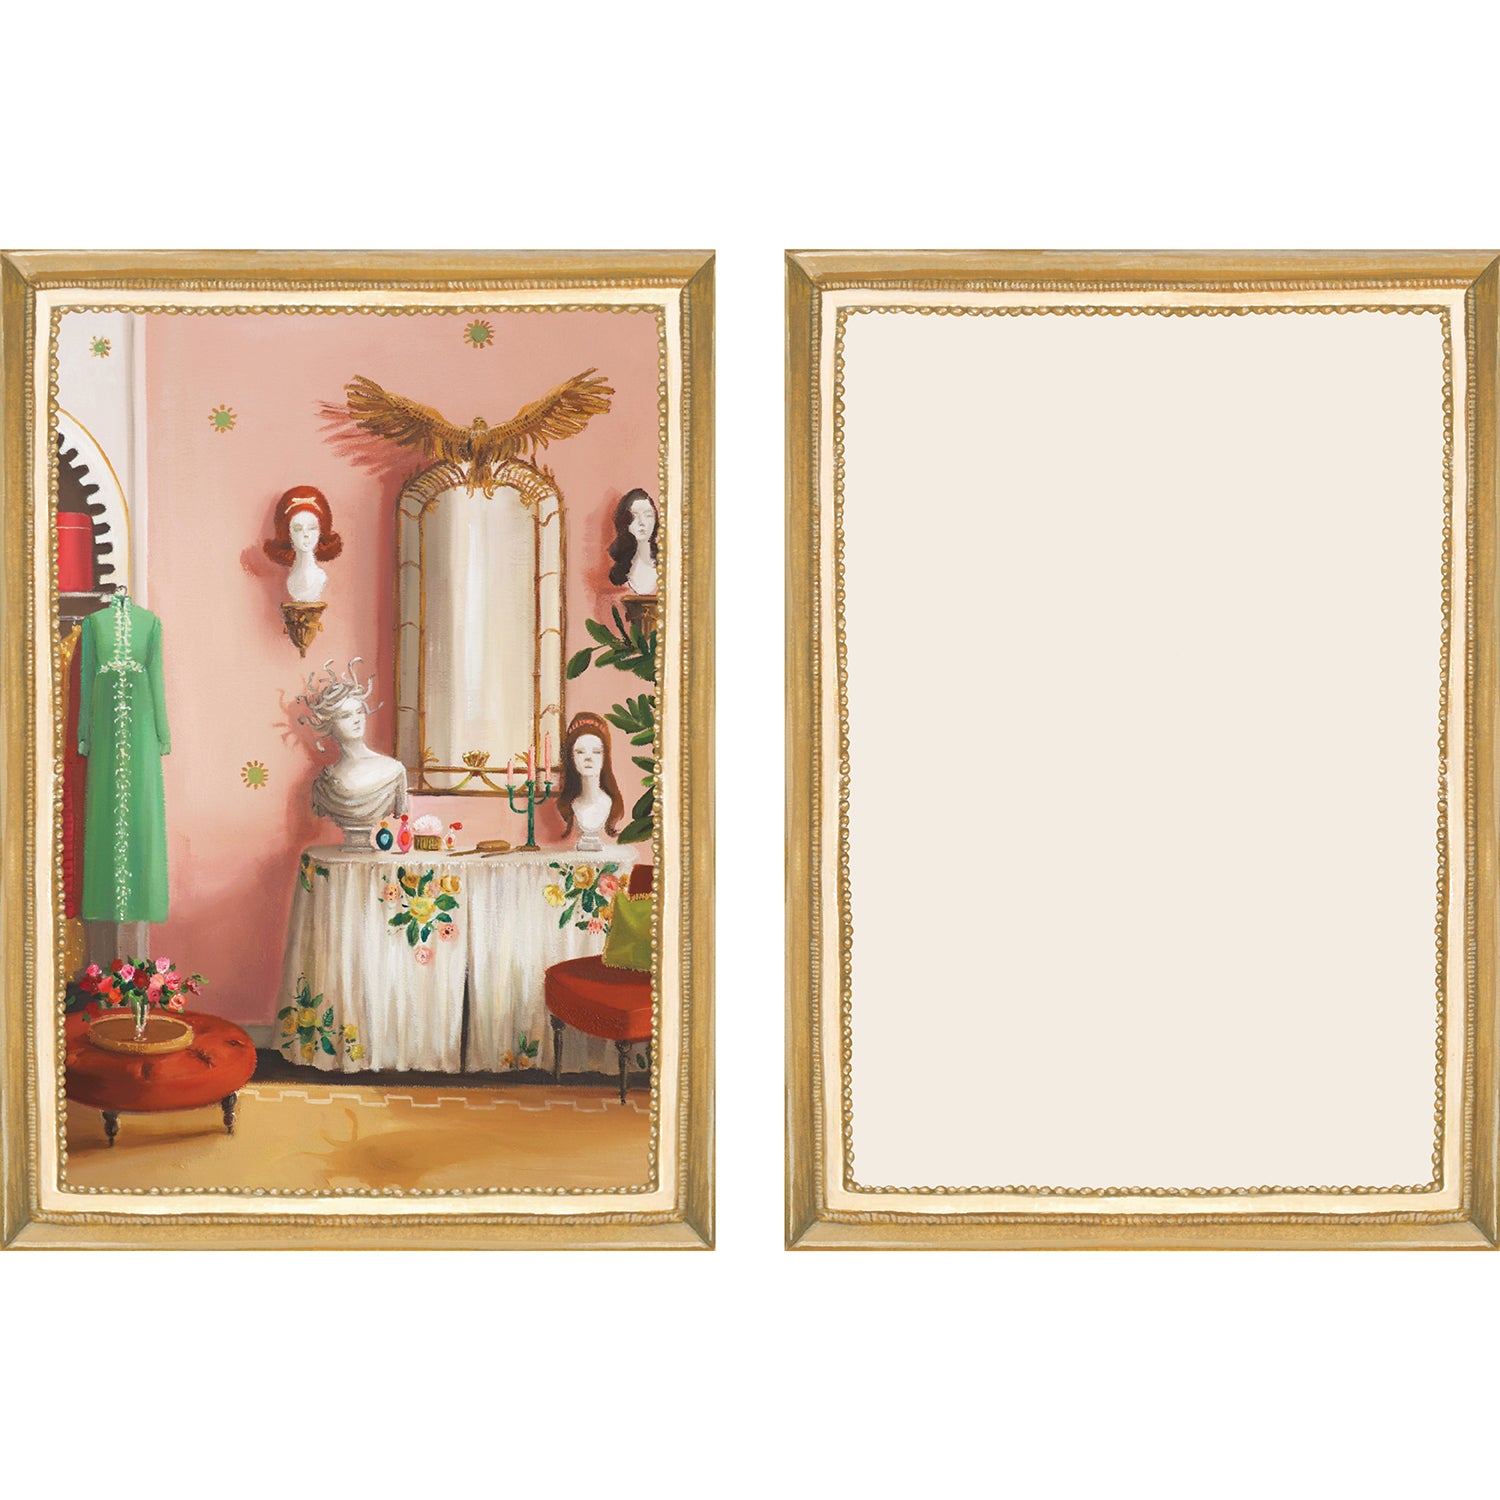 A luxurious picture of a pink room with a gold frame, inspired by Janet Hill, featuring the Home Sweet Home Flat Note Boxed Set of 6 Cards from Hester &amp; Cook.